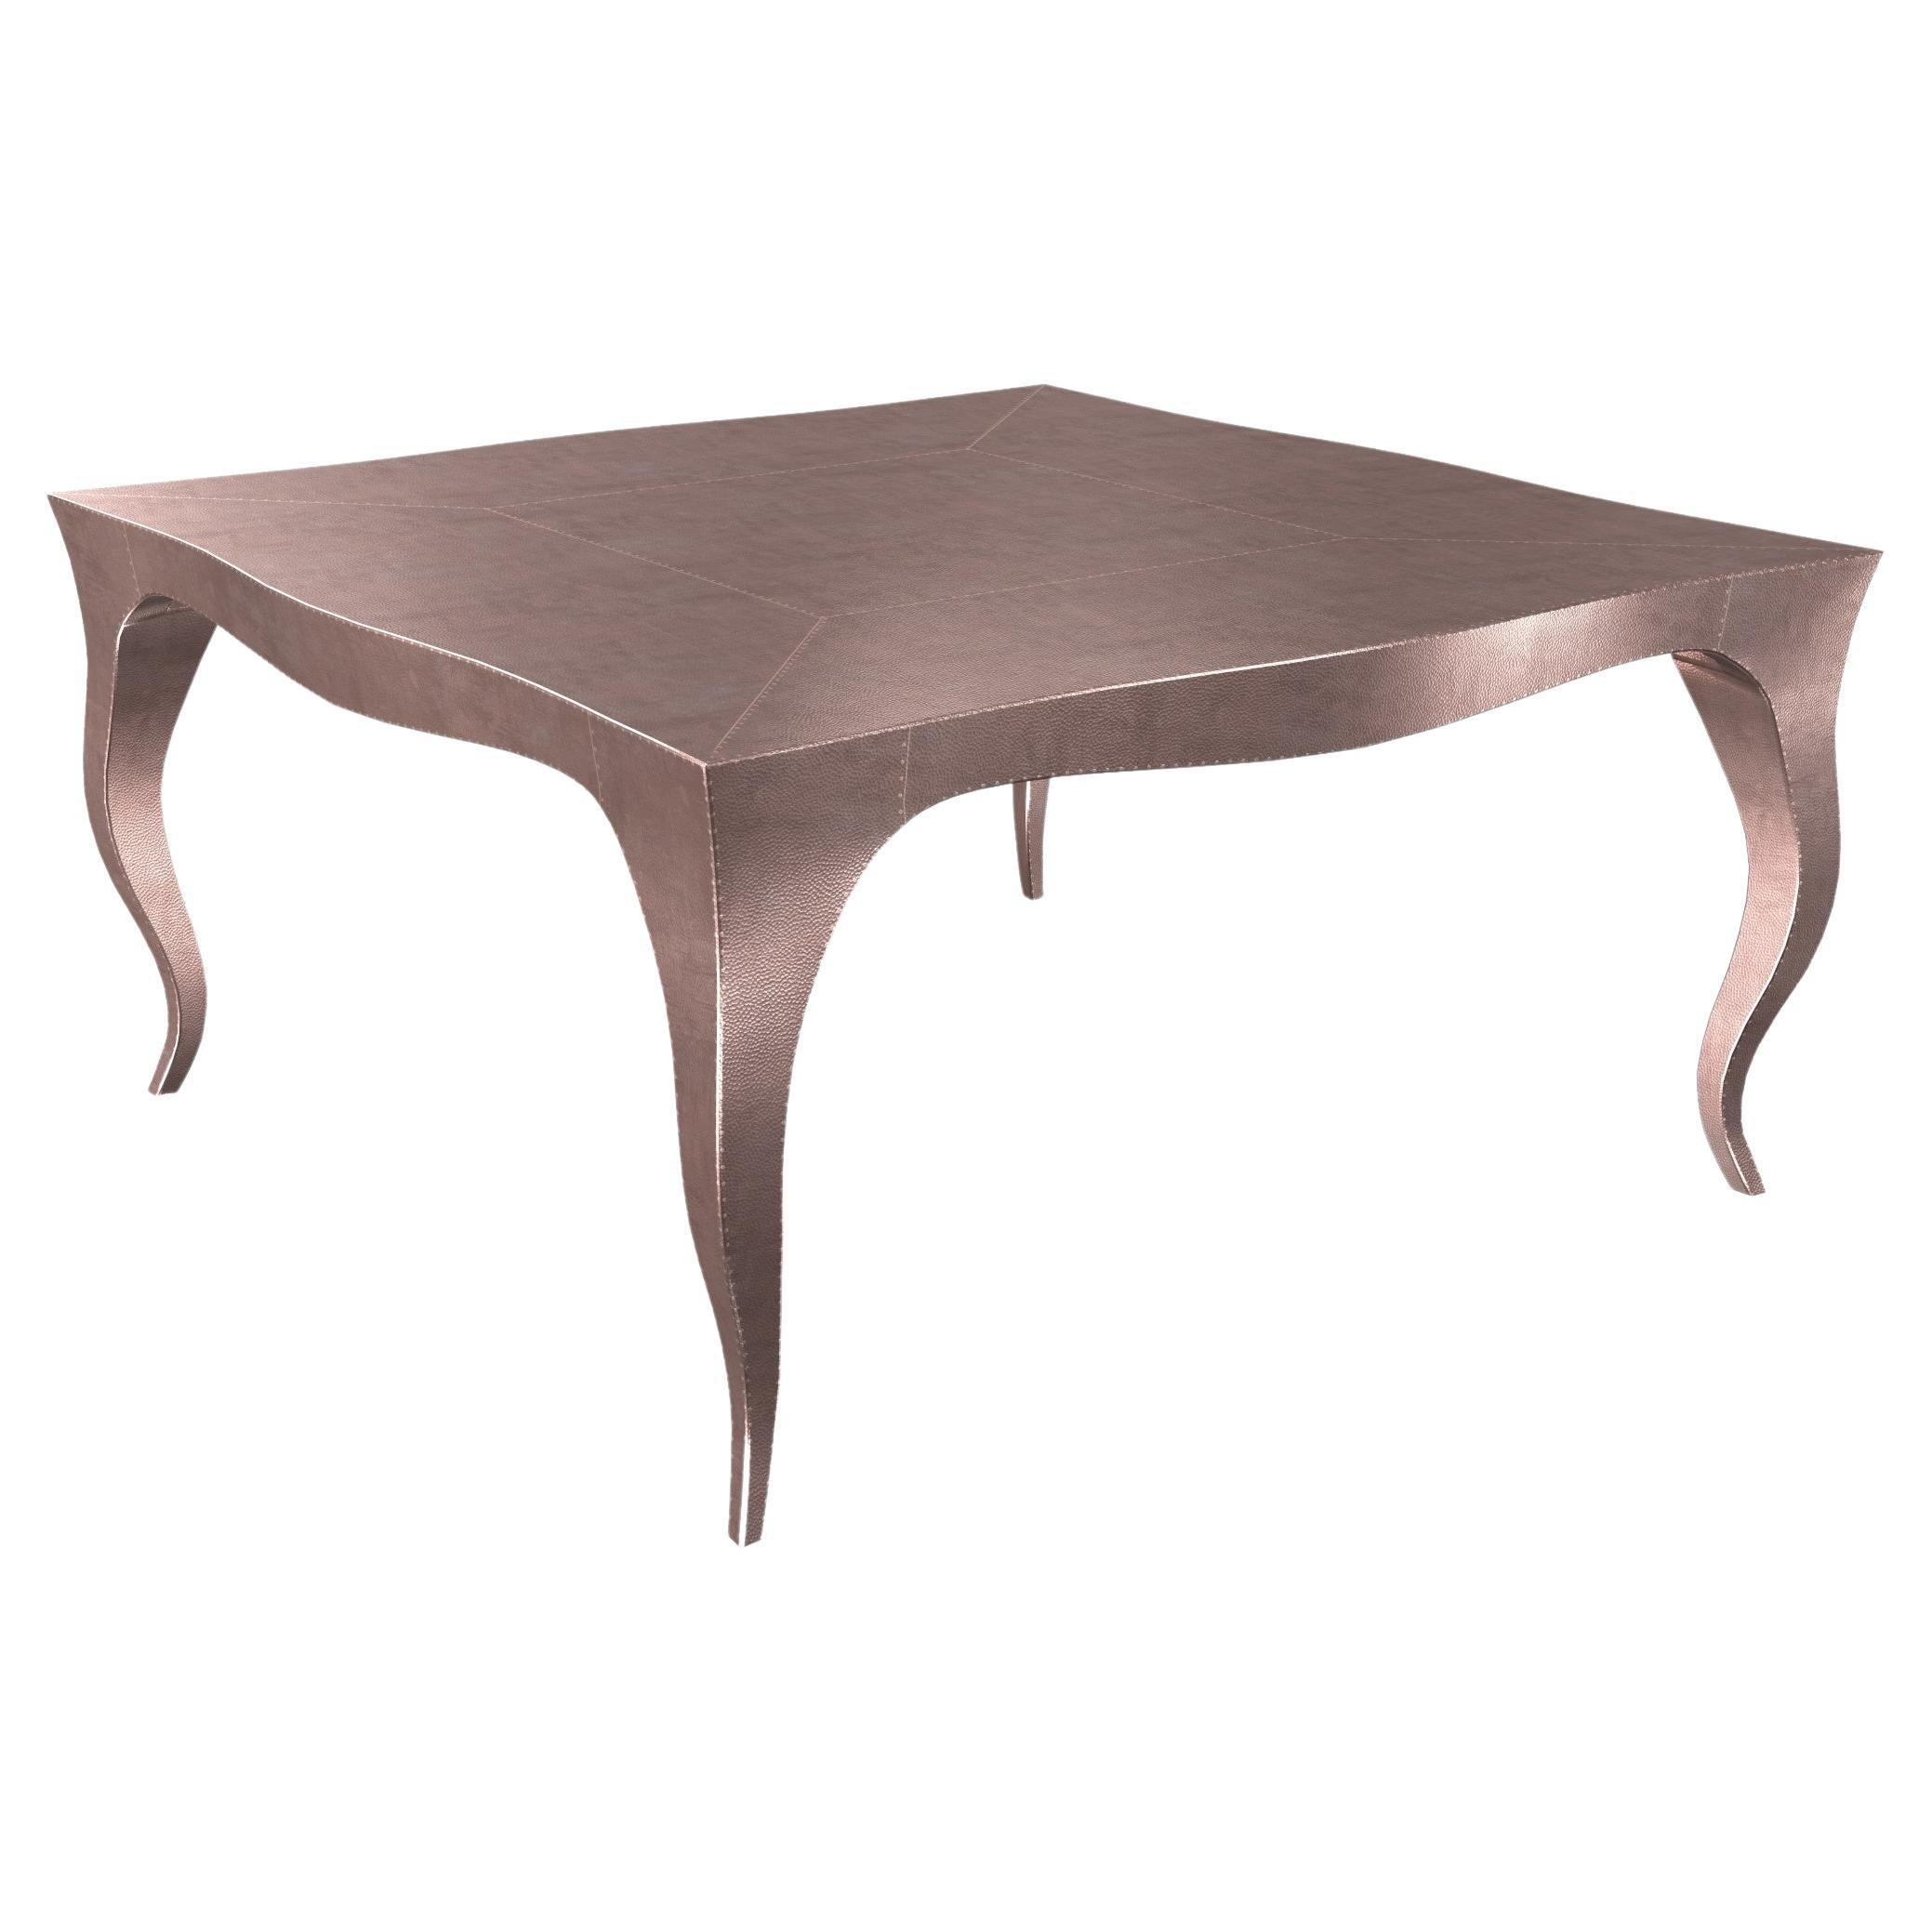 Louise Art Deco Industrial and Work Tables Mid. Hammered Copper by Paul Mathieu For Sale